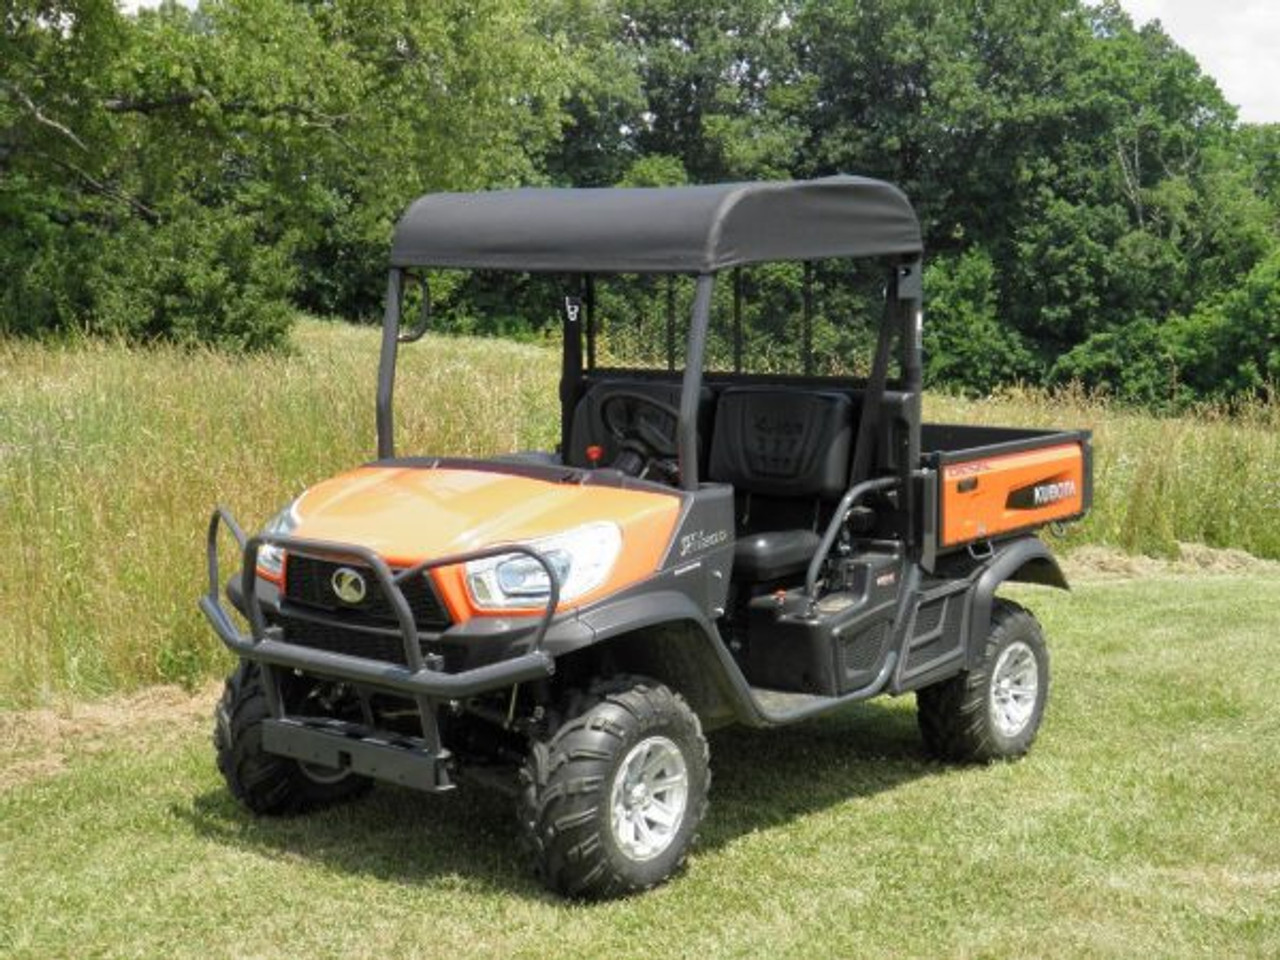 3 Star side x side Kubota RTV X900/X1120 soft top side and front angle view